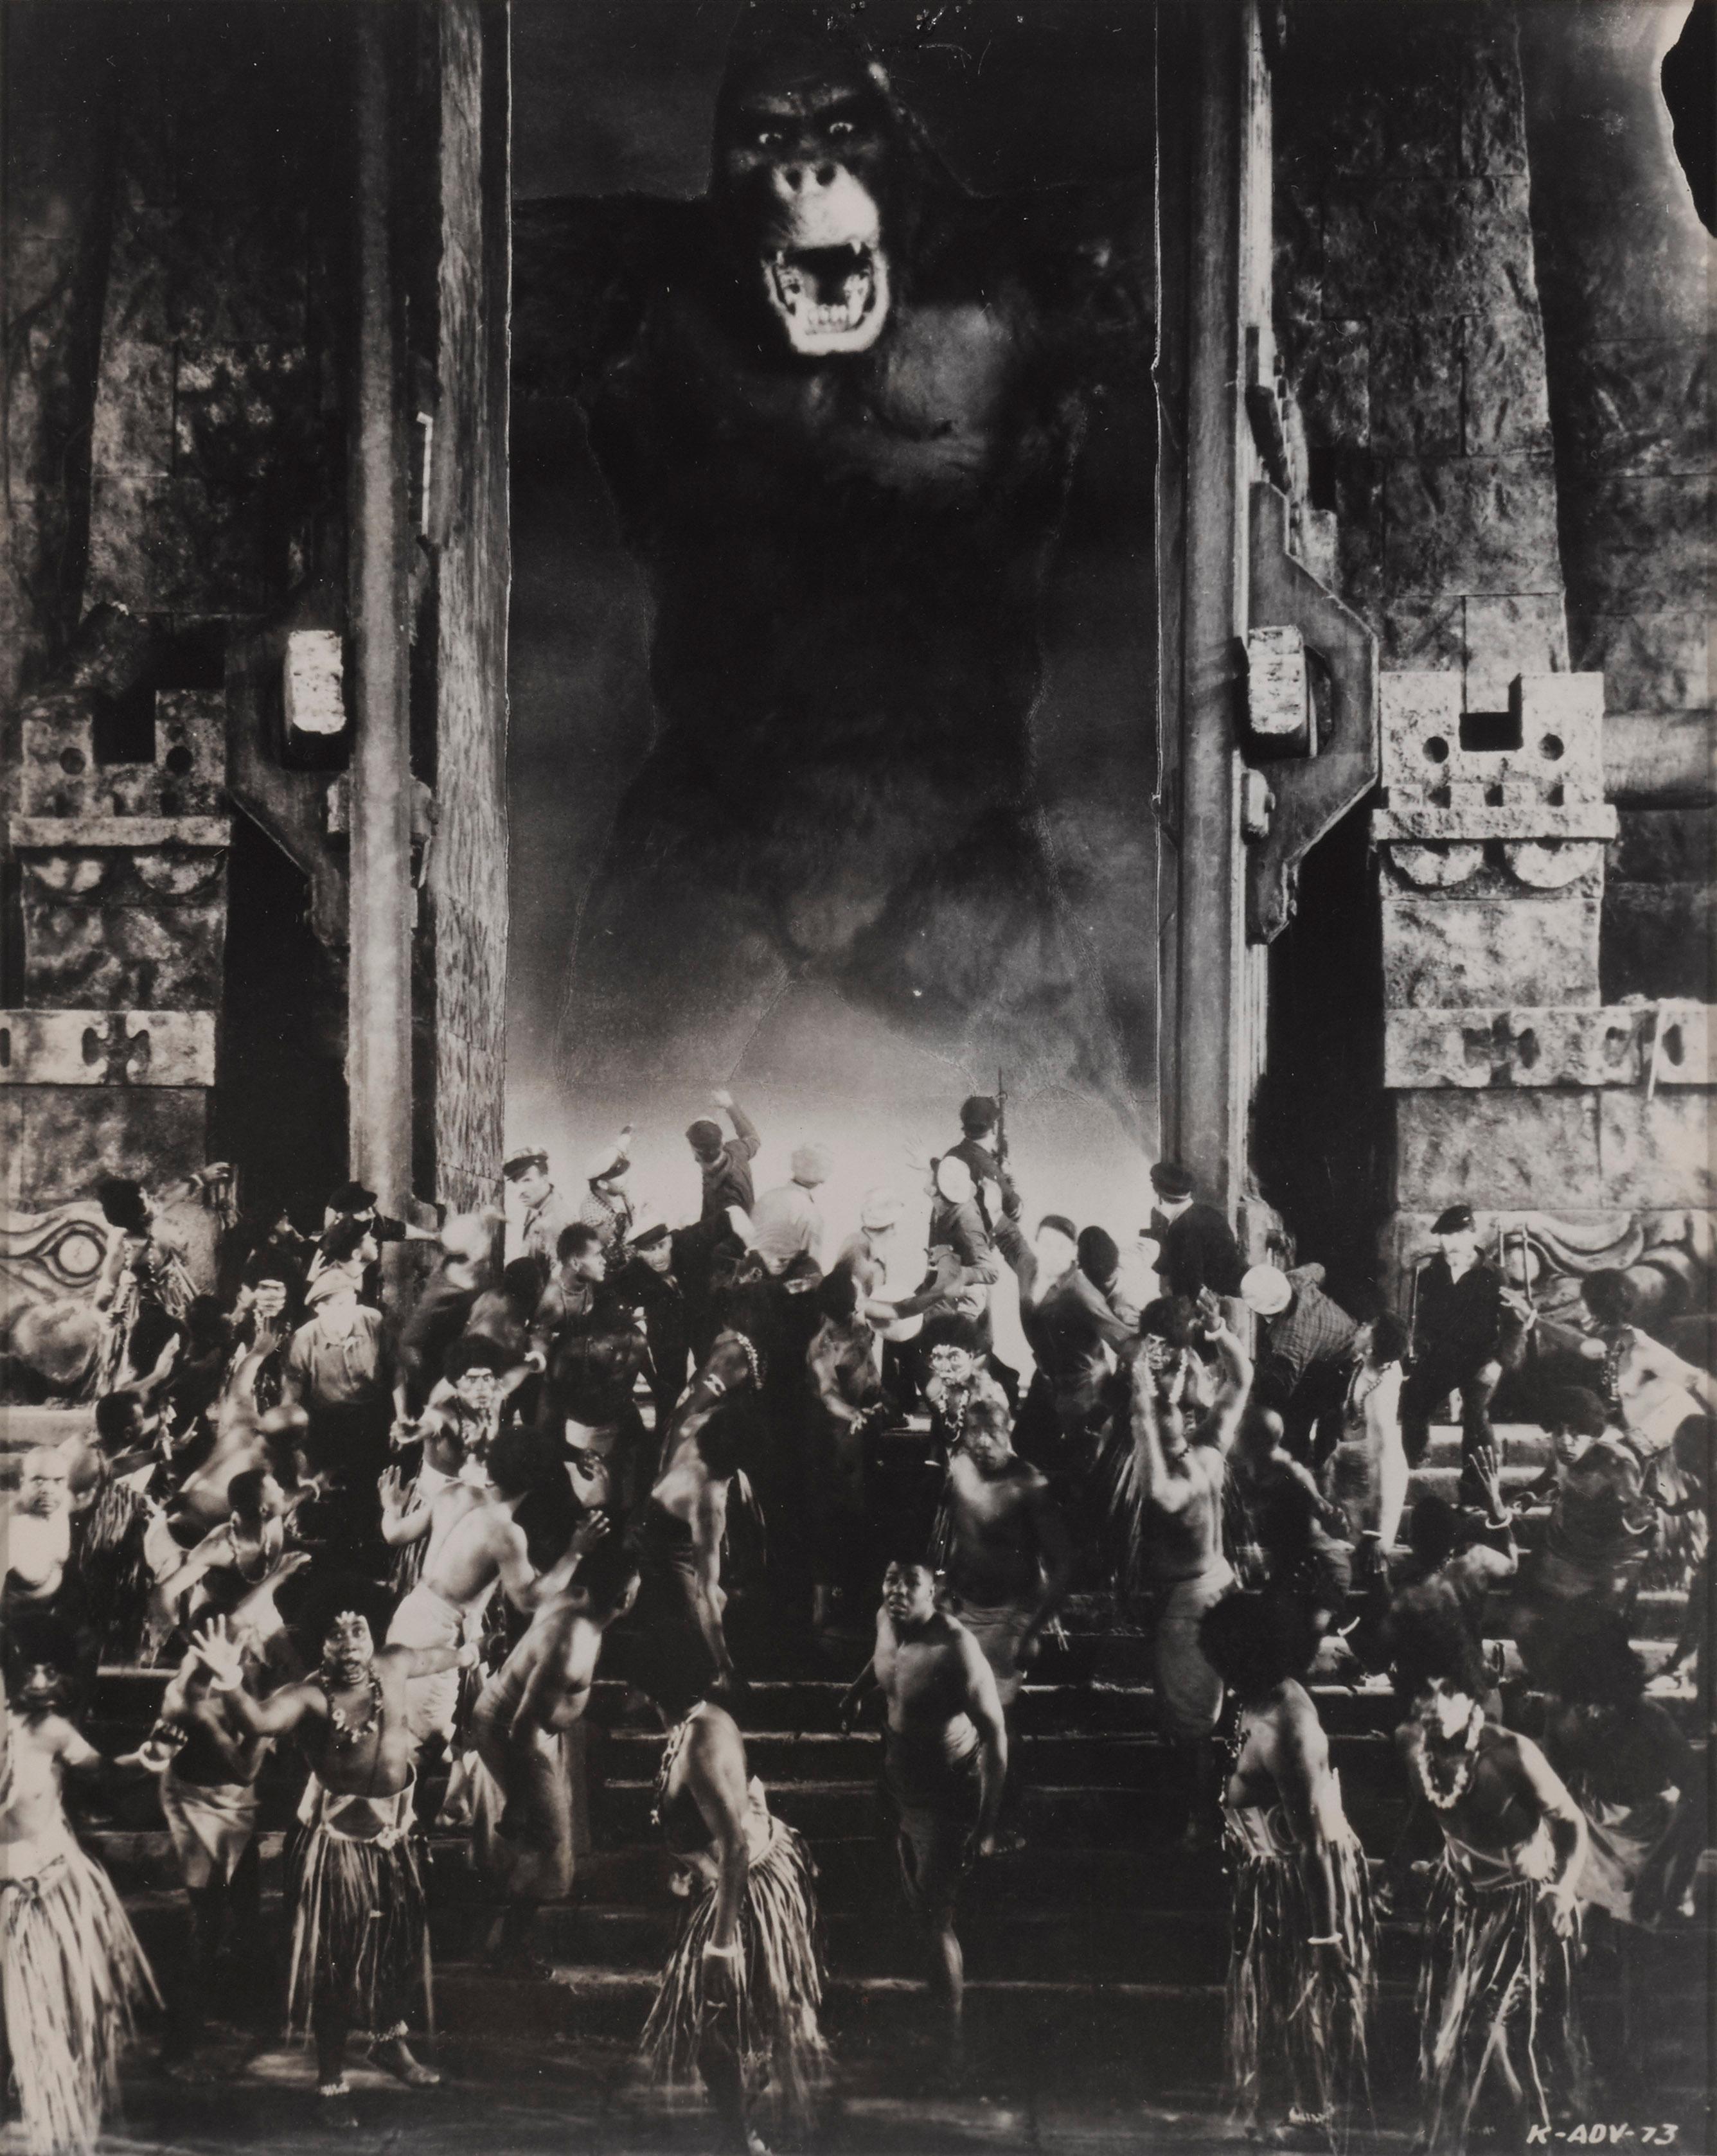 Original photographic production still used for a re-release of the film in the late 1930's or early 1940's
King Kong is perfect blend of adventure, science fiction and horror, King Kong is the ultimate monster movie. Willis O'Brien's use of